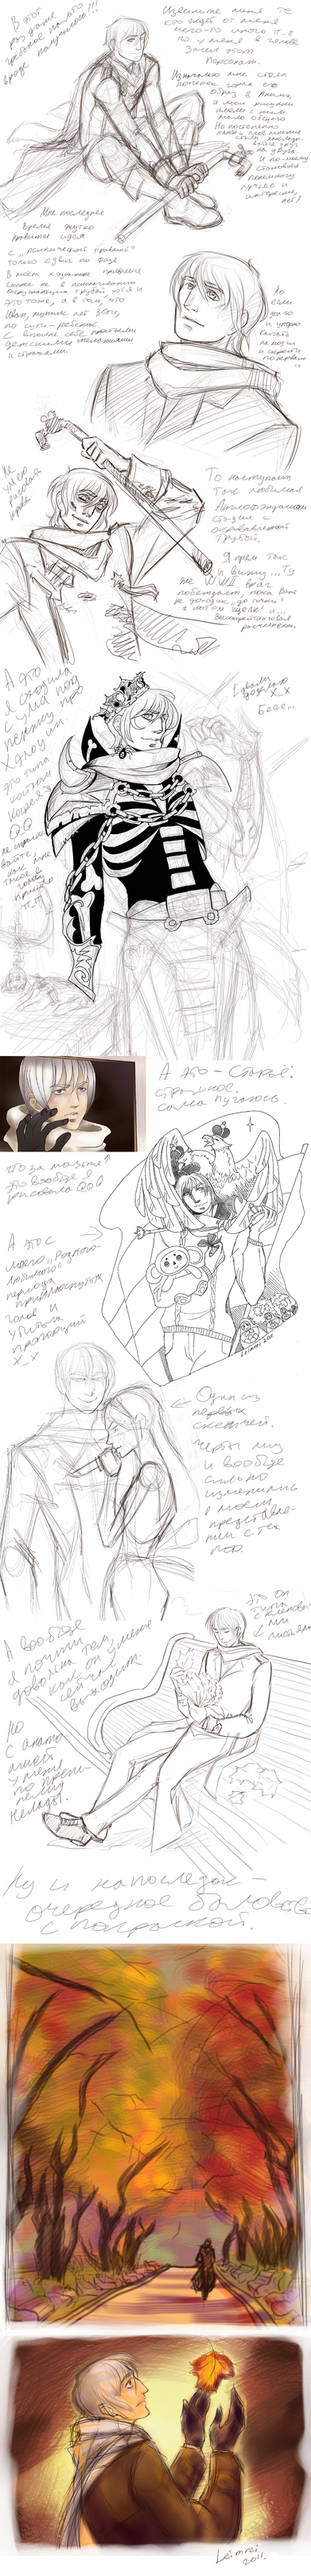 APH:Russia_sketches